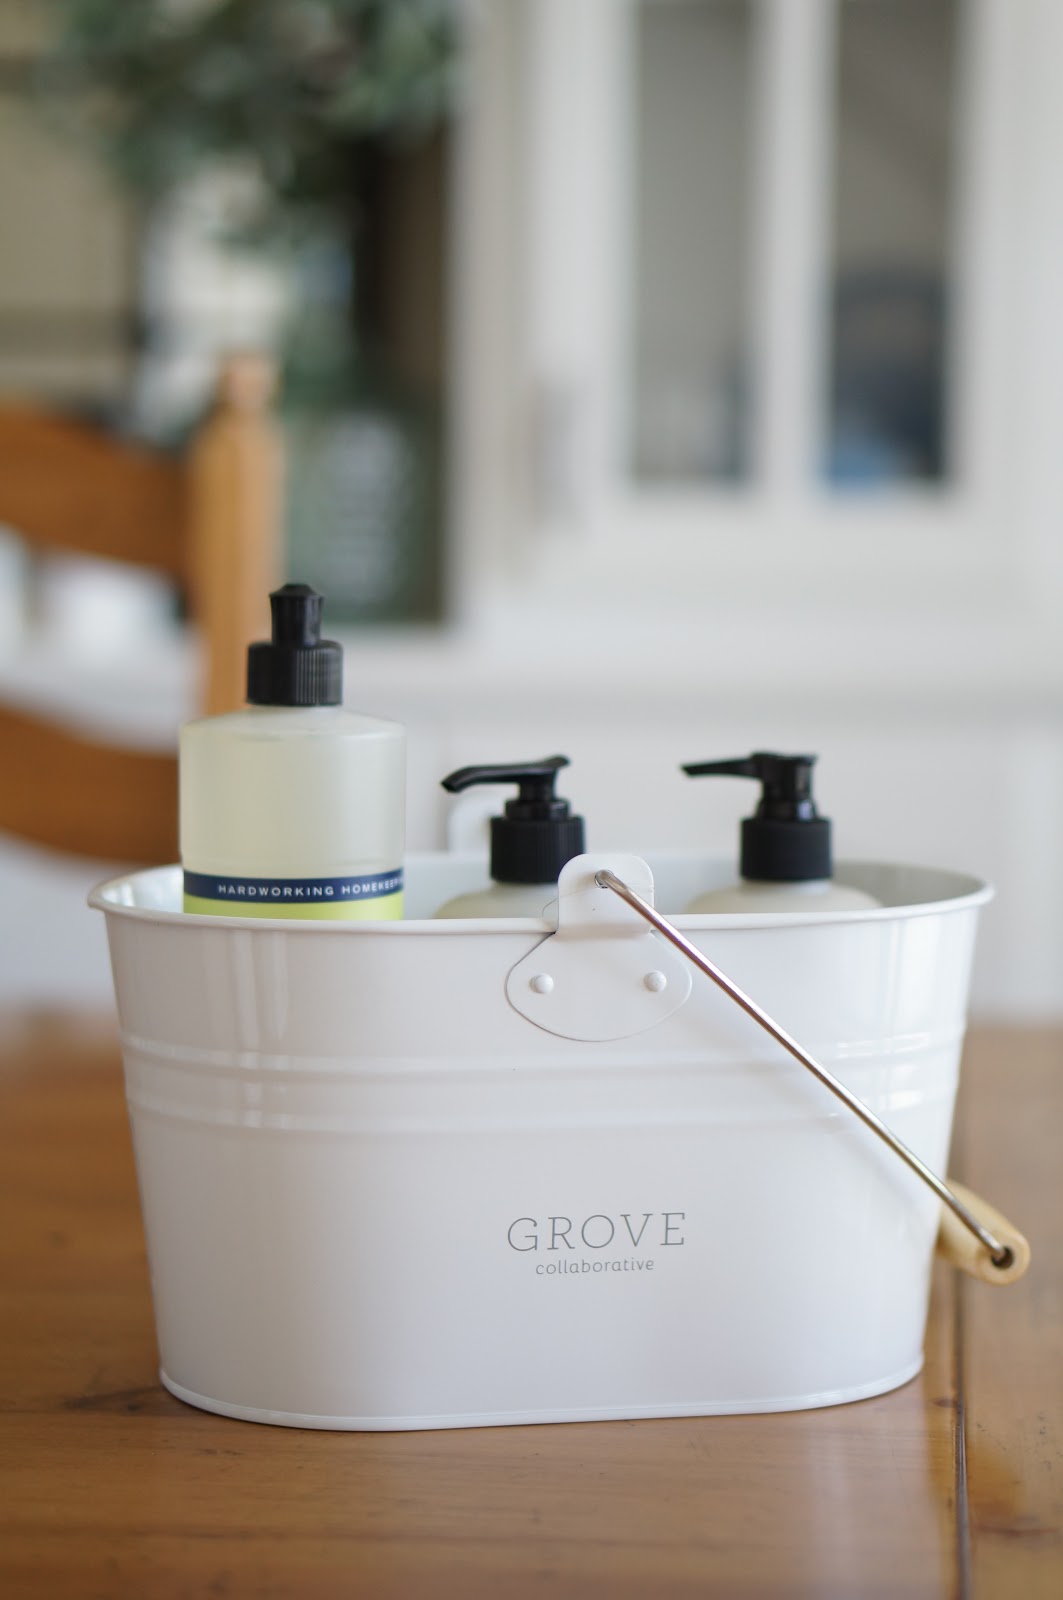 Popular North Carolina style blogger Rebecca Lately shares her July Grove Collaborative order, along with an offer for a free cleaning caddy and products!